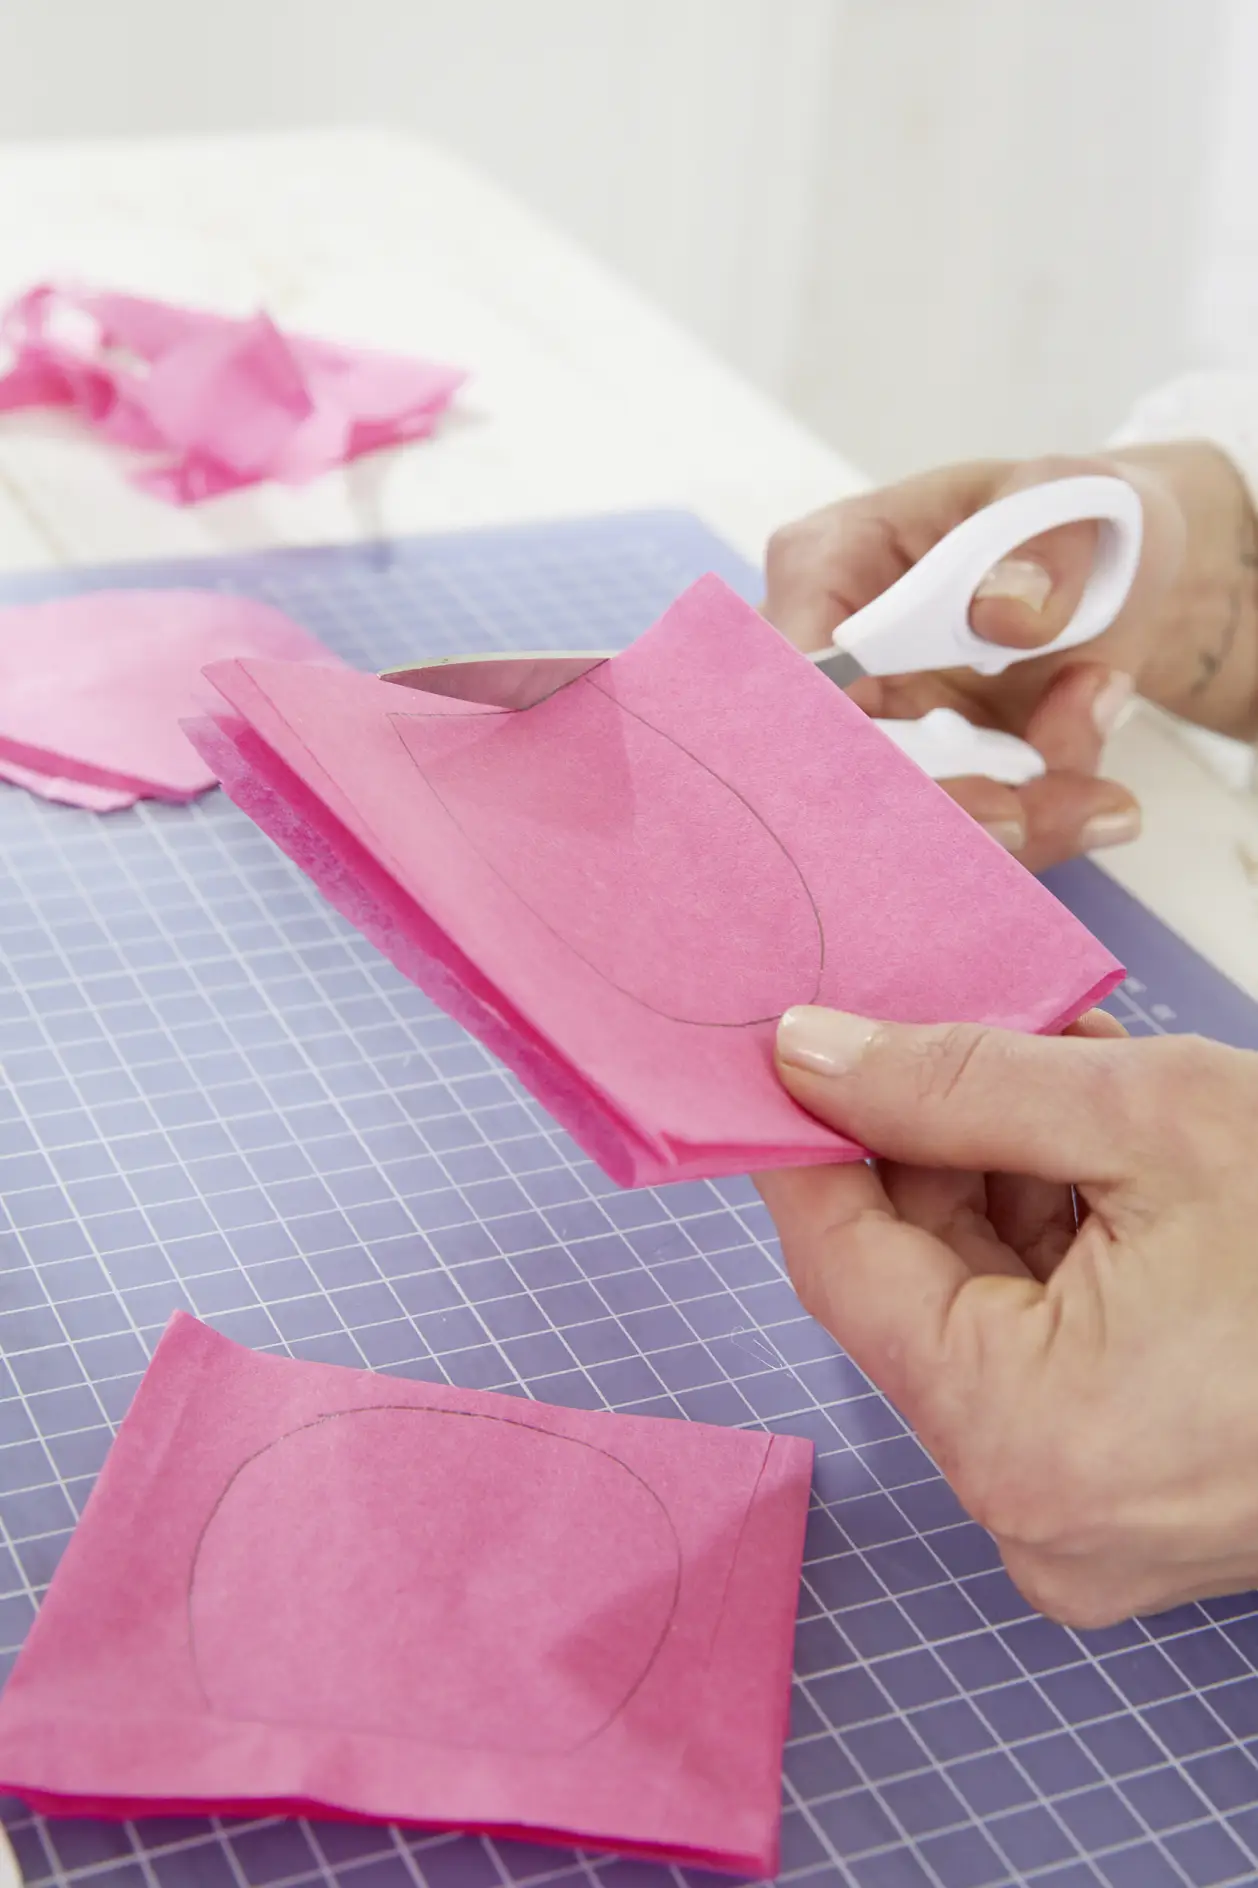 DIY Tissue Paper Rose / Step 3: Cut out